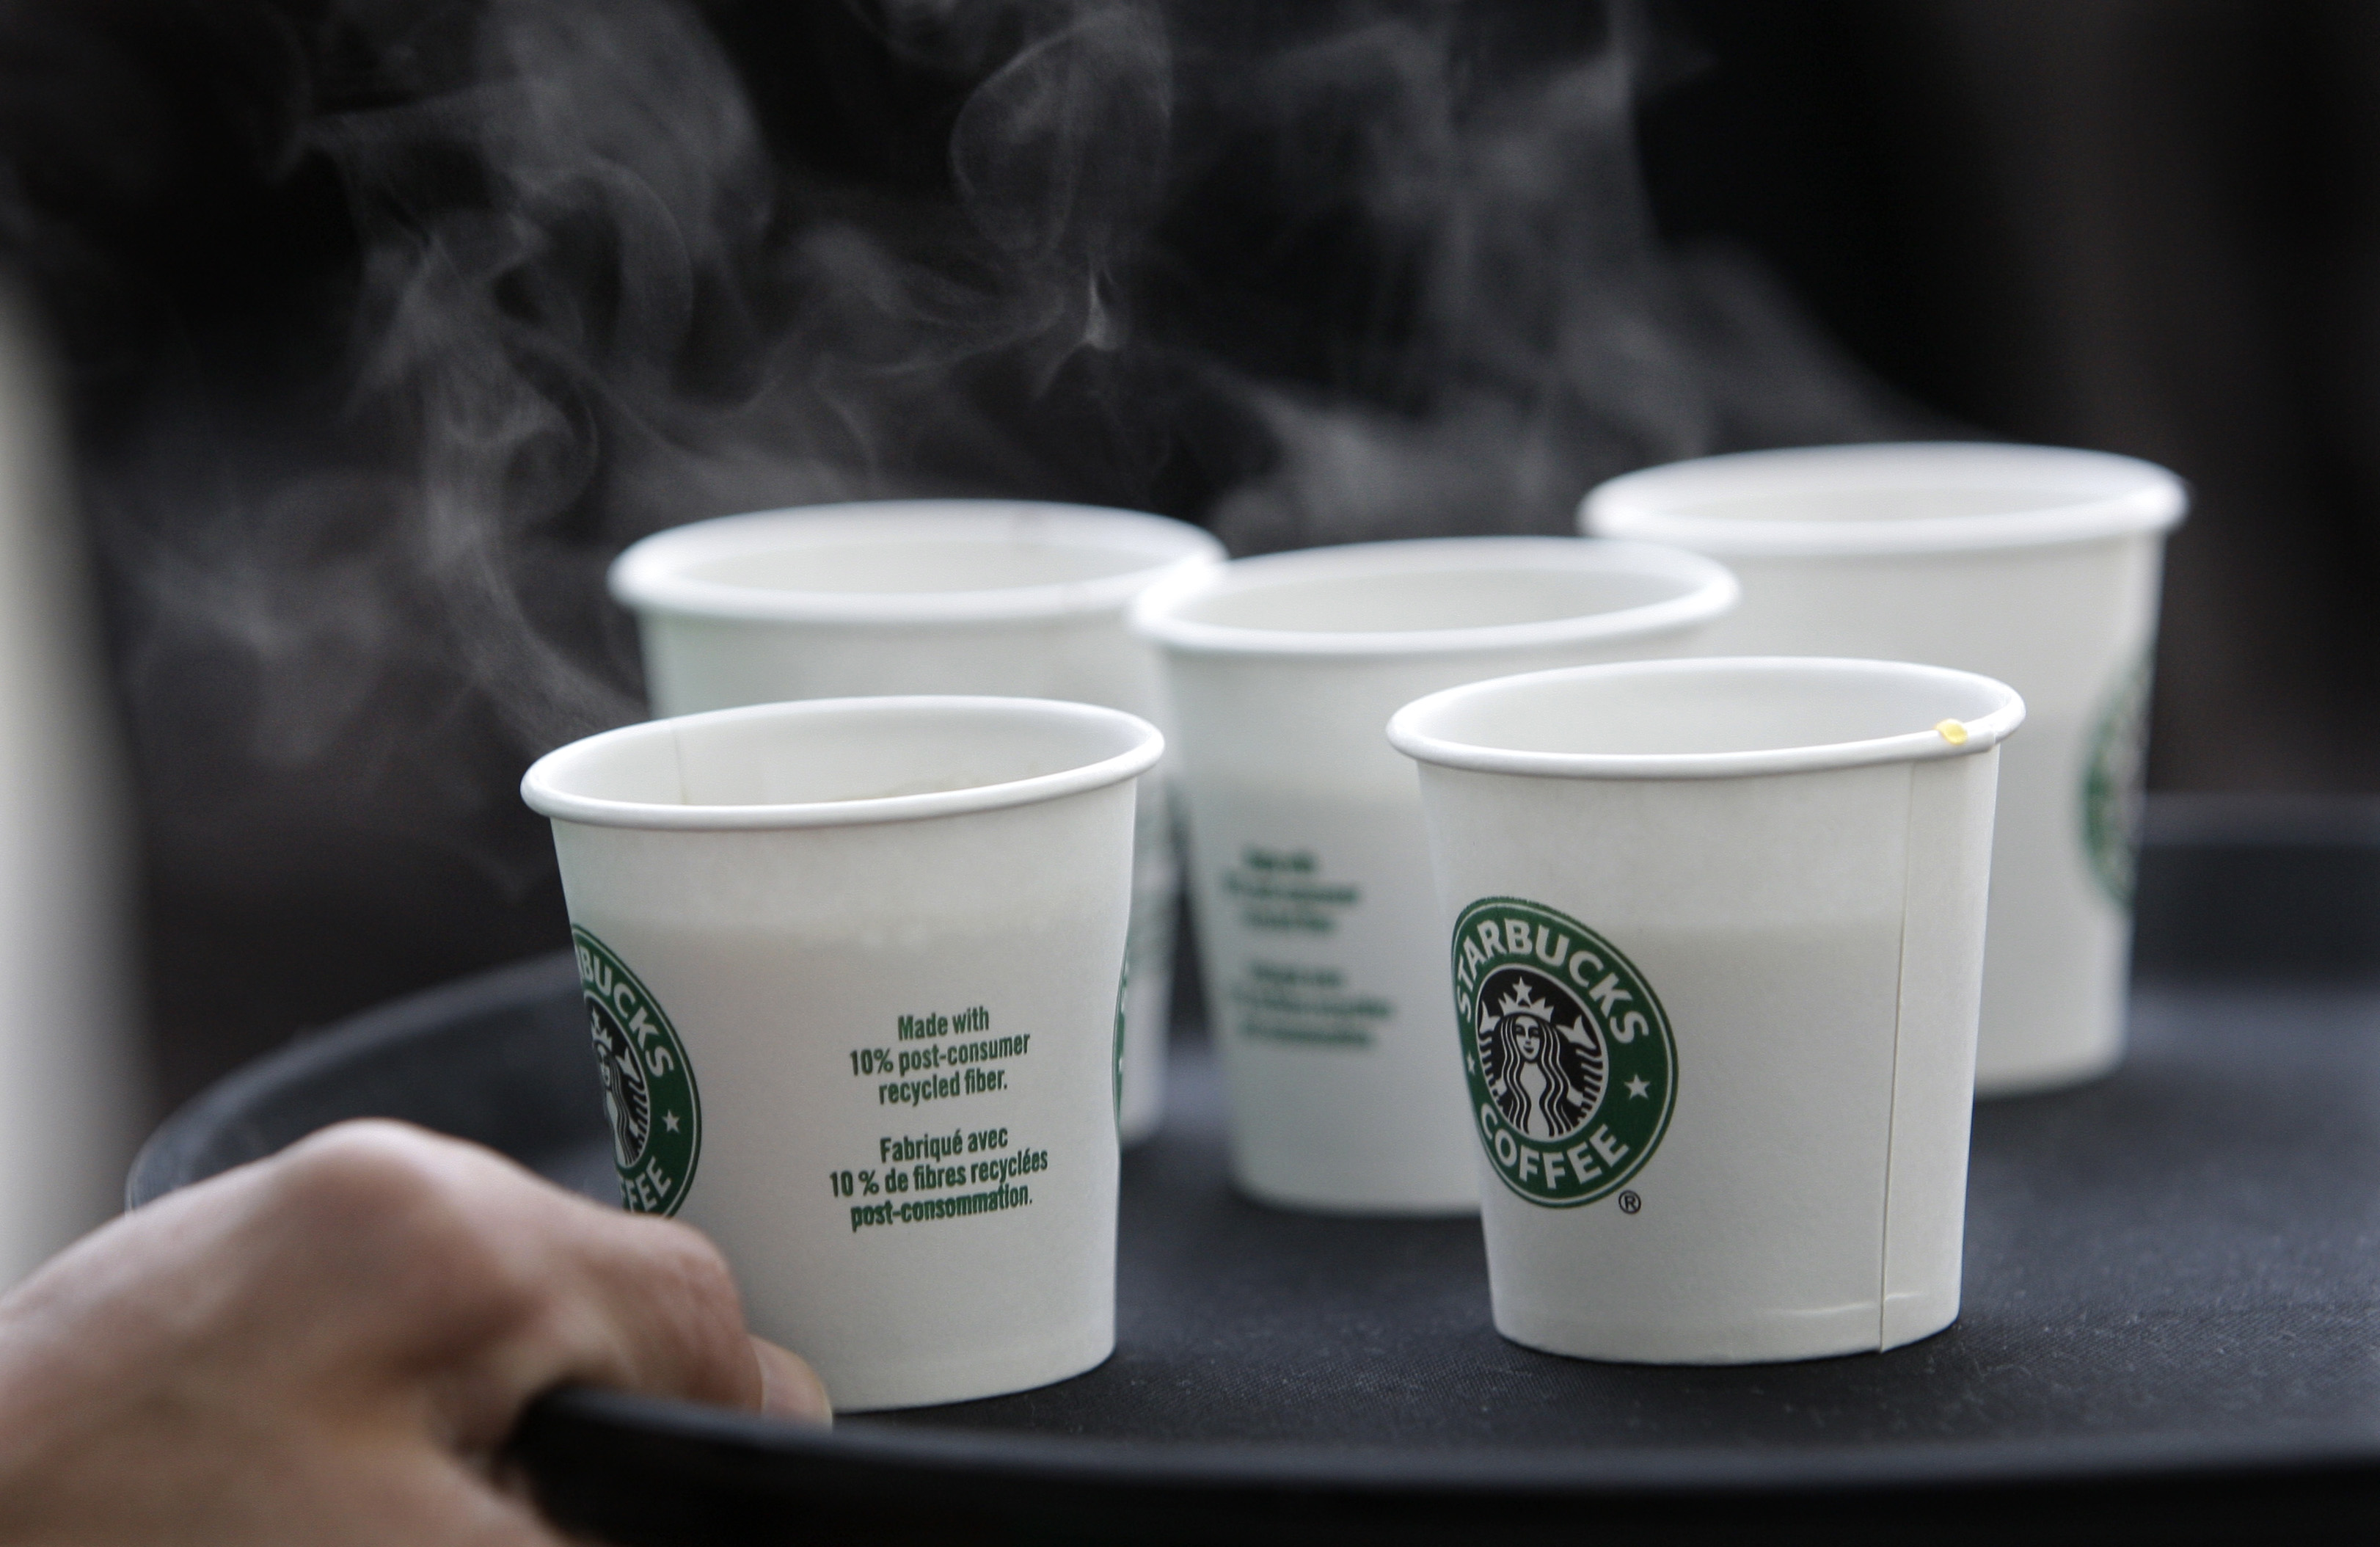 British university 'sorry' after wrongly giving students 300 coffee cups' worth of caffeine